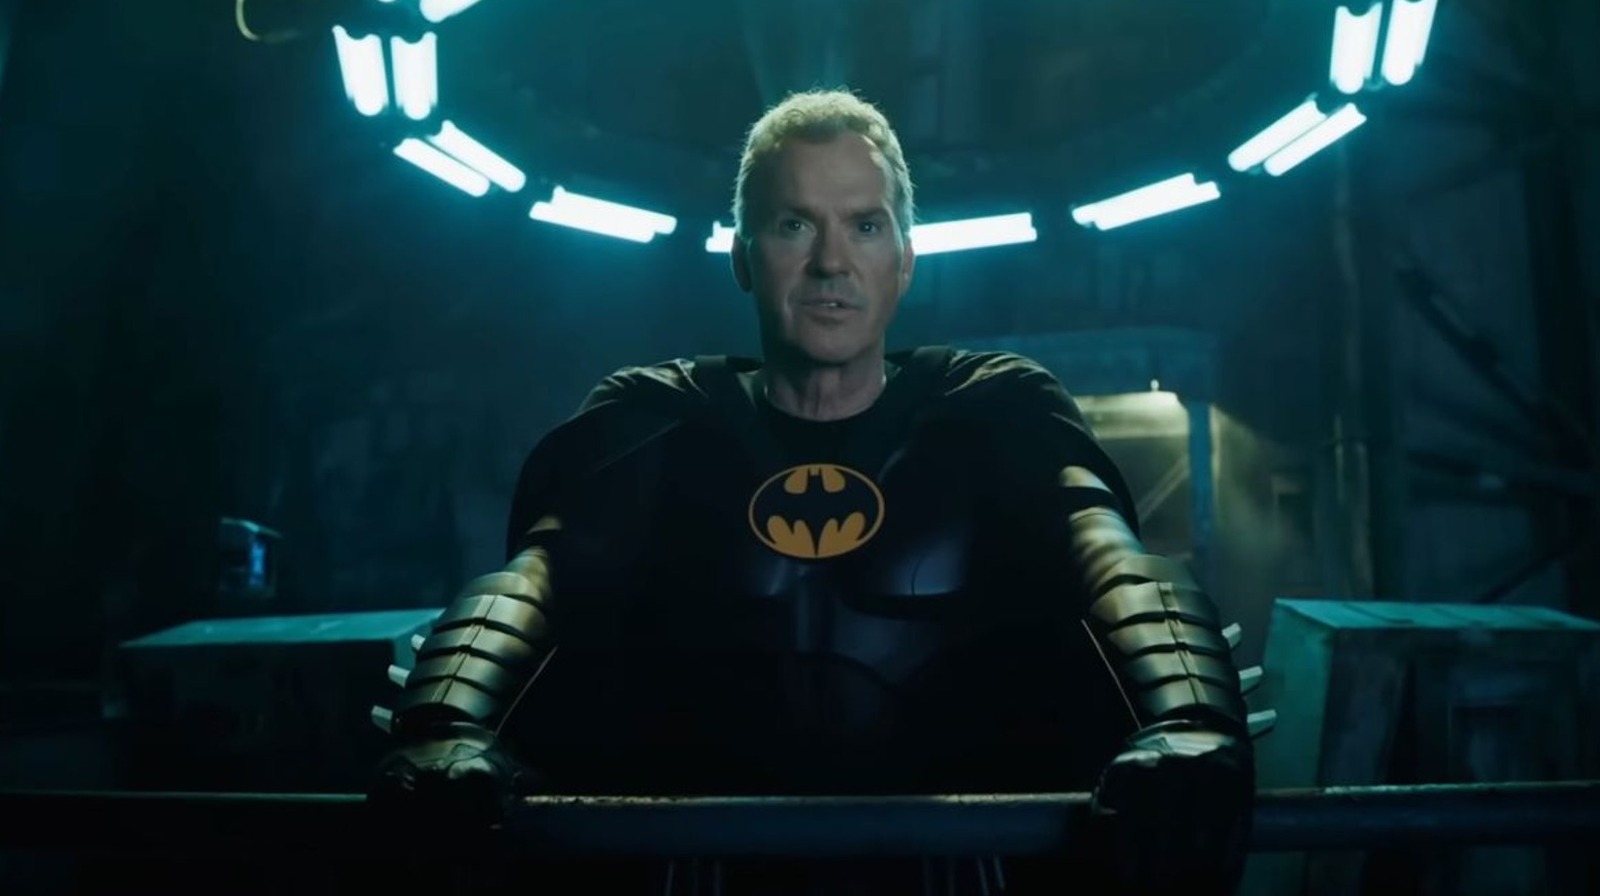 Michael Keaton Had Nothing But Confidence Stepping Back into Batman